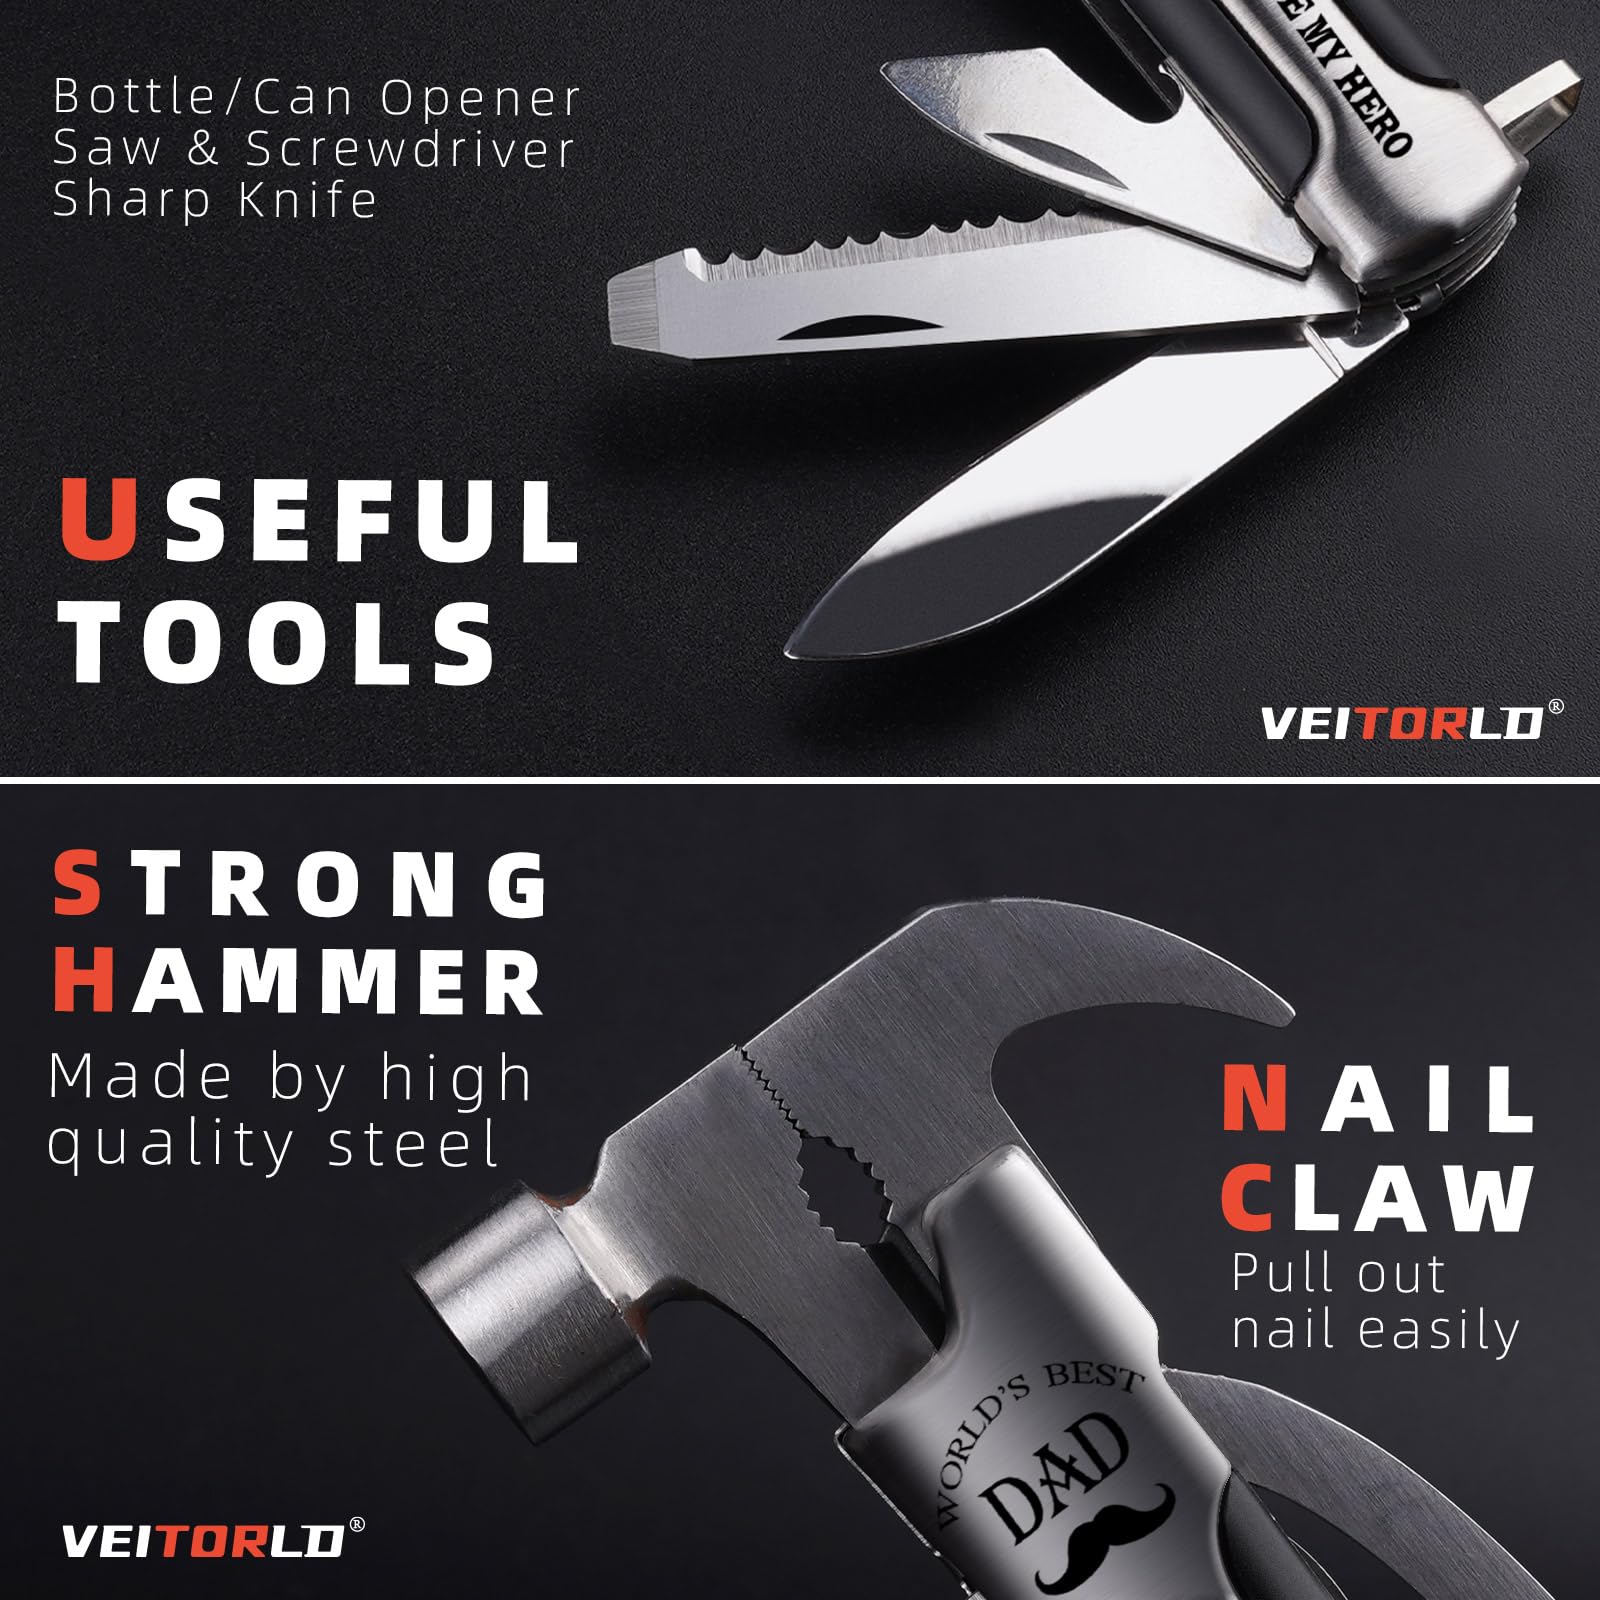 VEITORLD All in One Survival Tools Hammer Multitool with Engraved Wooden Box, Dad Gifts for Christmas, Cool Gifts for Dad Stepdad Who Wants Nothing, Stocking Stuffers for Dad, Personalized Gifts